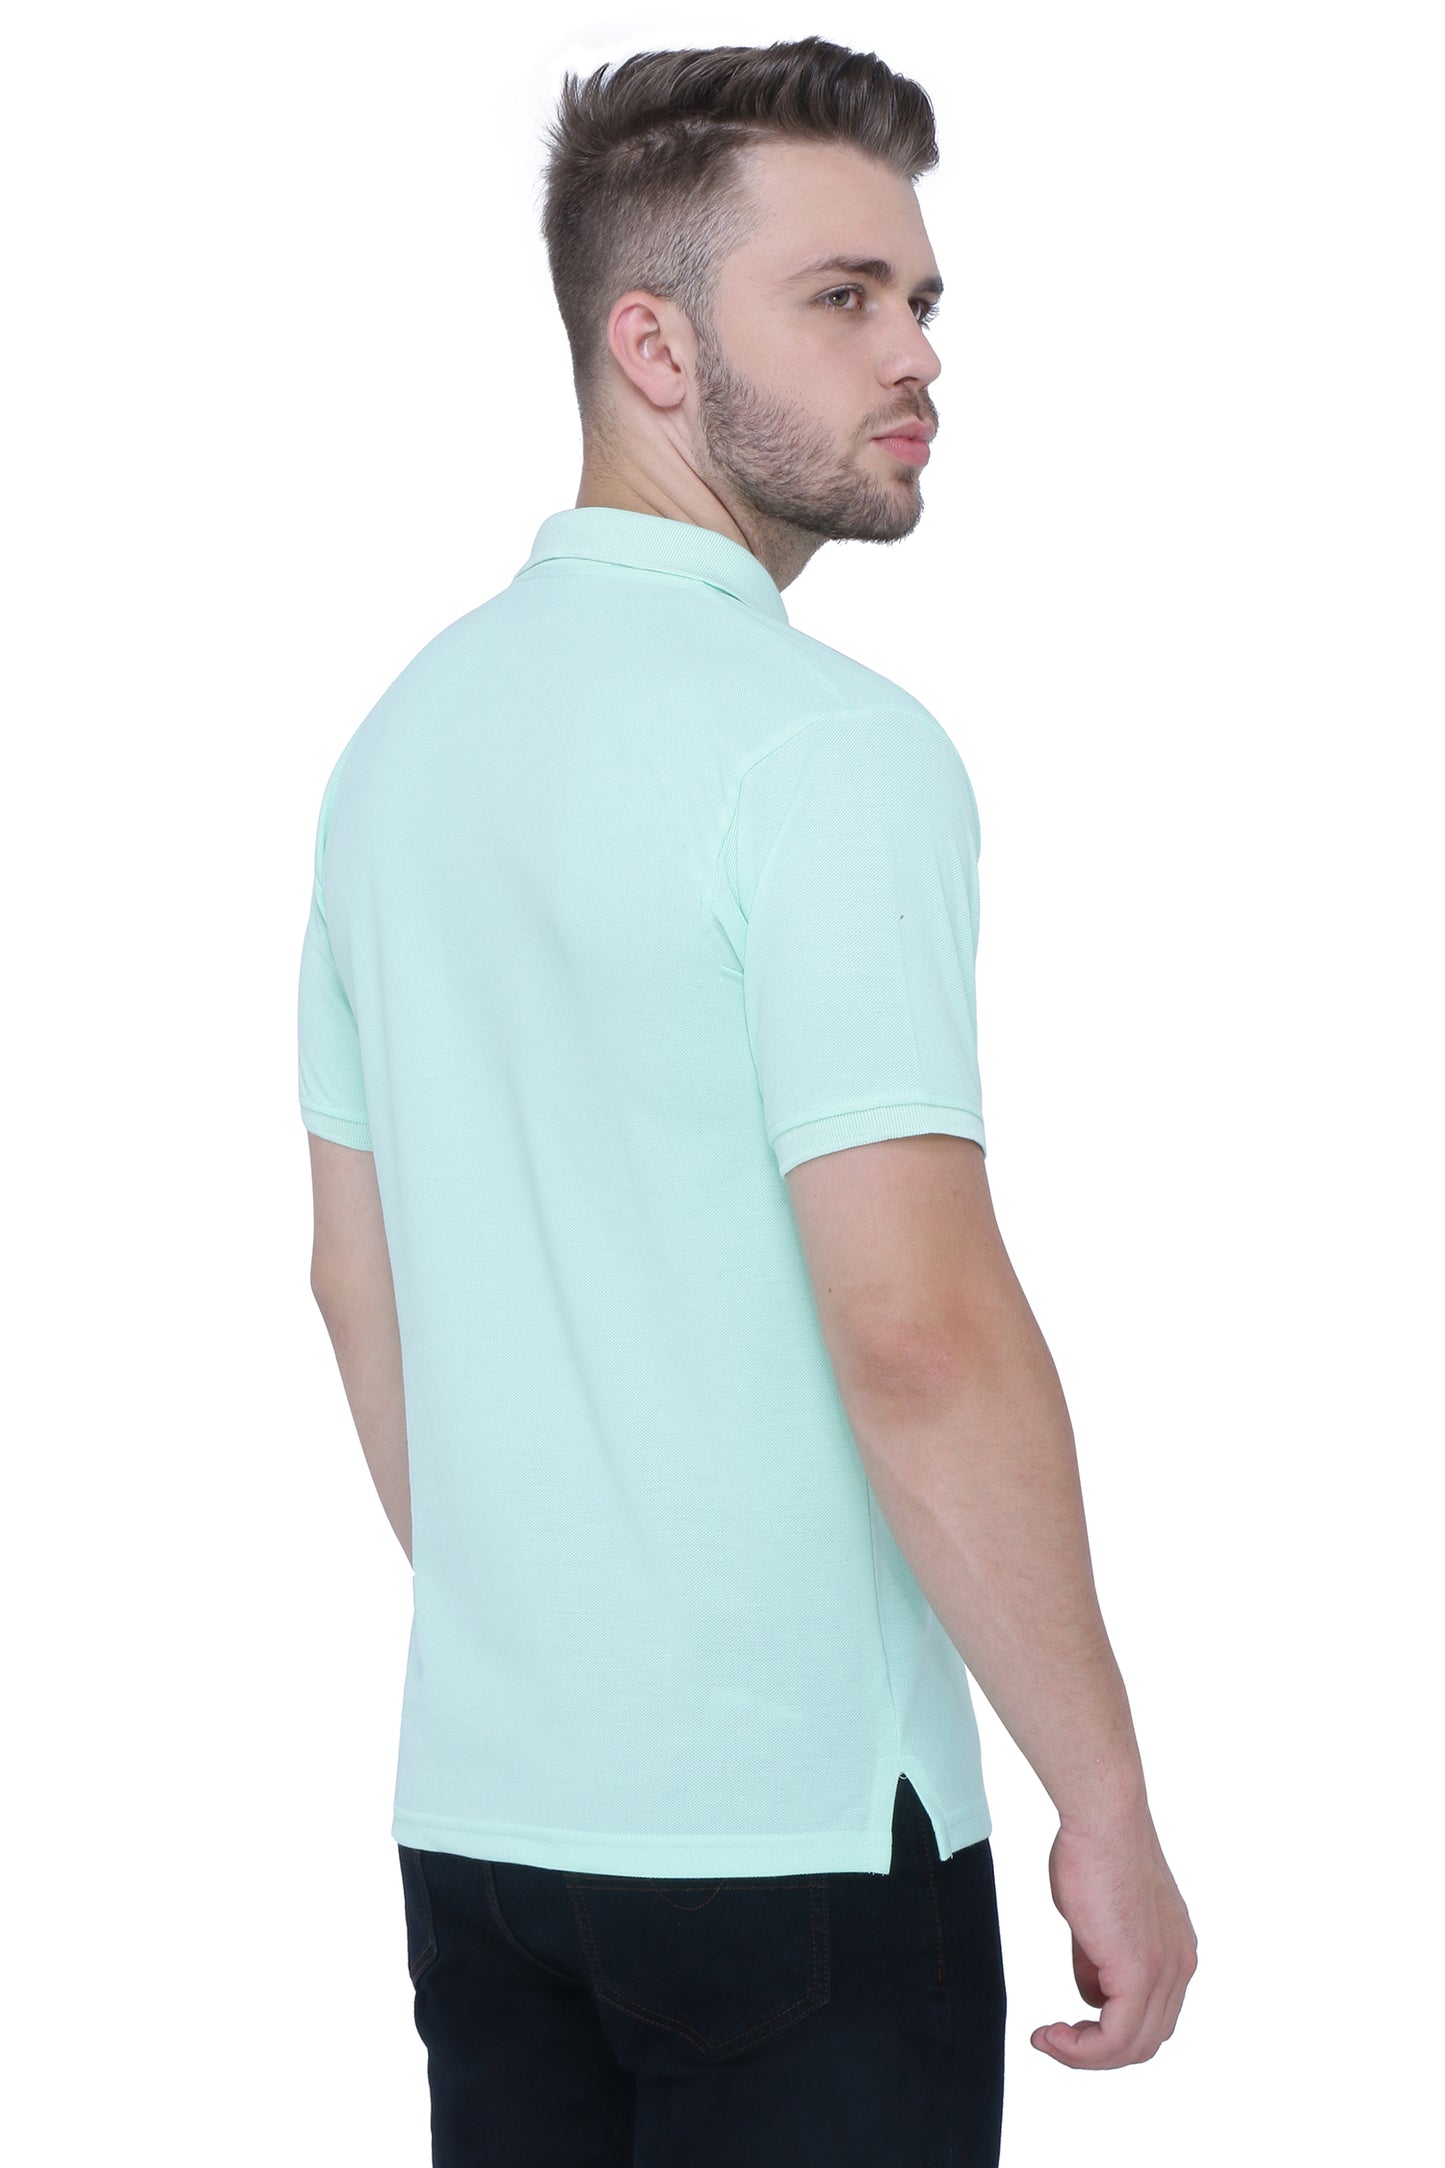 Neo Garments Men's Cotton Polo Neck Half Sleeve T-Shirt | SIZES FROM XS TO 2XL